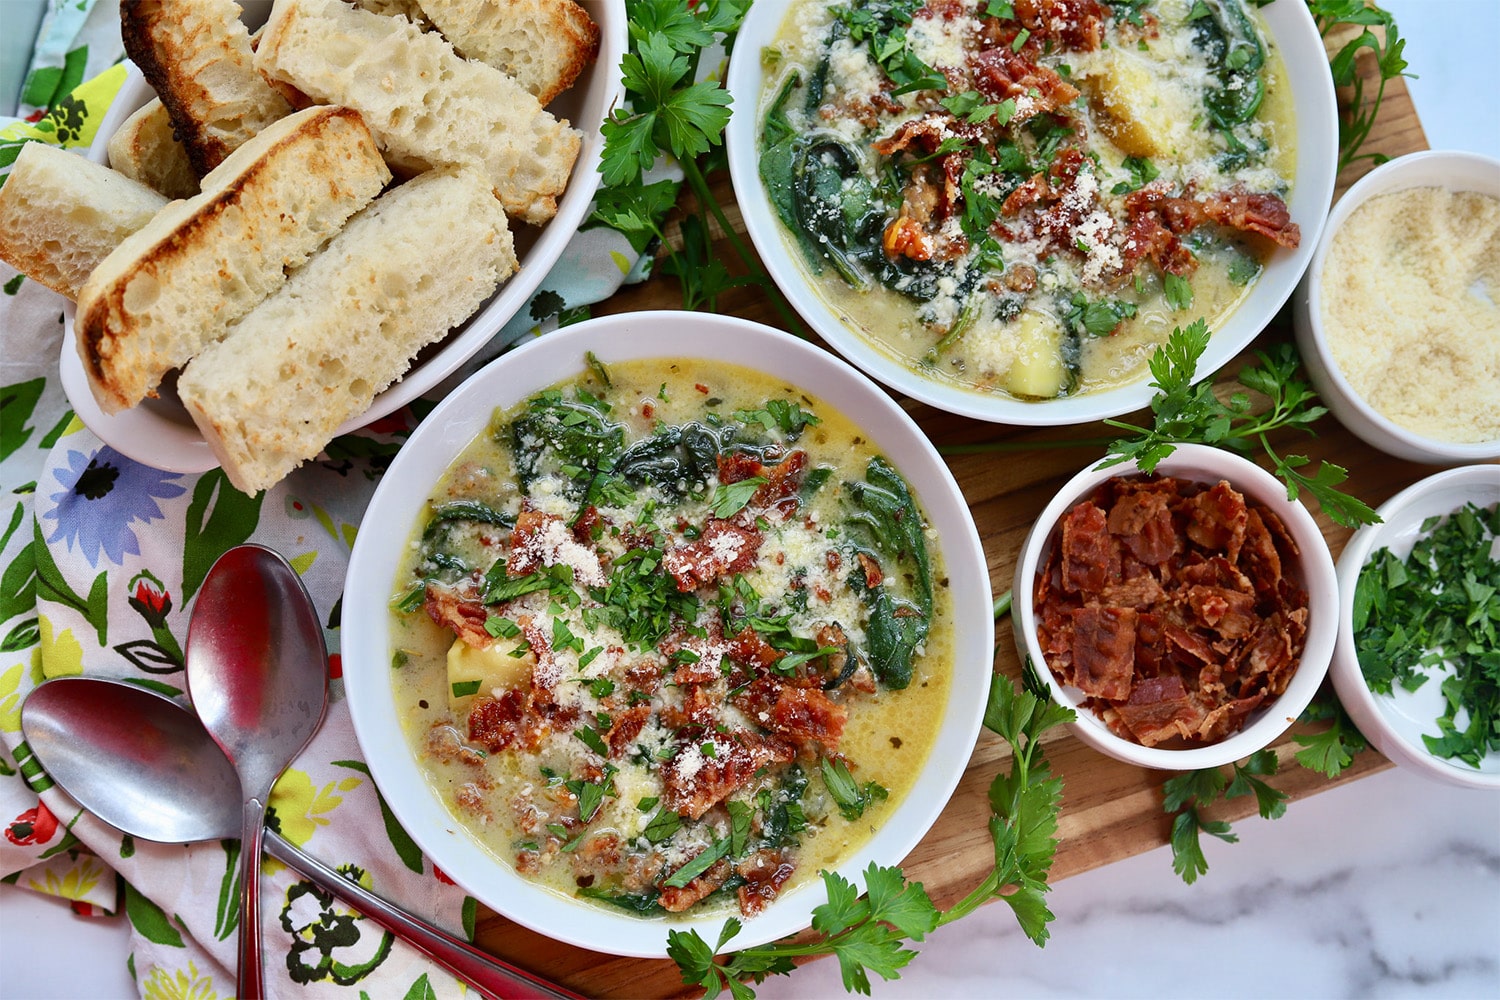 23 interesting facts about Zuppa Toscana